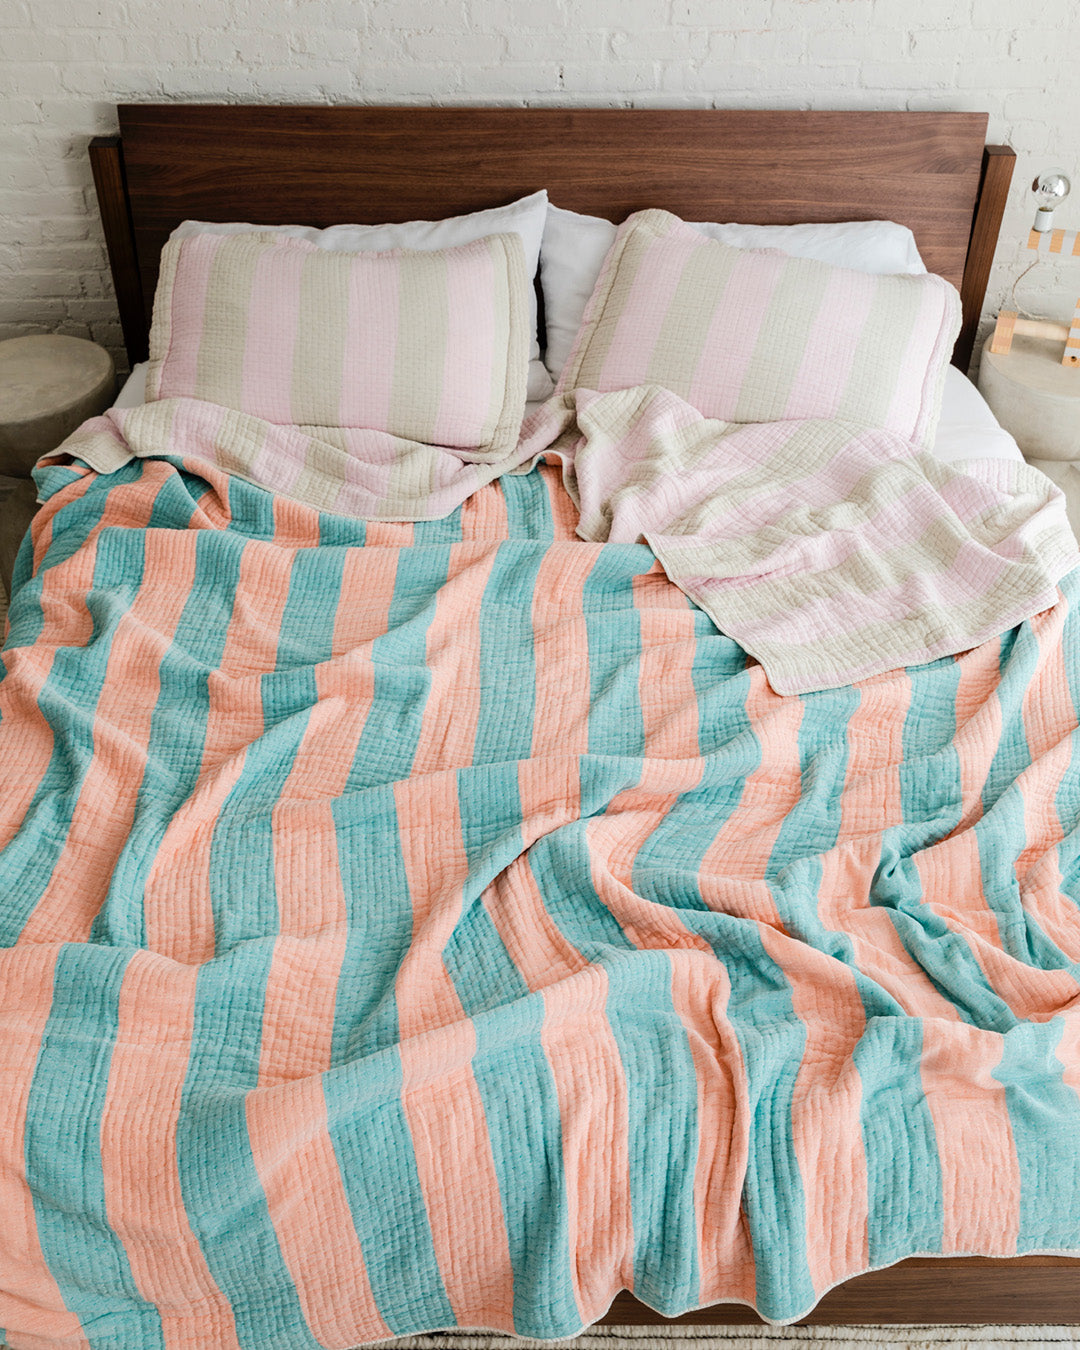 Dusen Dusen Warm Stripe Coverlet Set in reversible stripe colorways. Pink and beige stripes on one side, orange and green stripes on the other side. Woven matelassé coverlet with an inner layer of insulation for a quilted effect. Stonewashed, with an extra soft and gauzy hand feel. 100% cotton shell, polyester fill. Machine wash cold and tumble dry low. Made in Portugal.